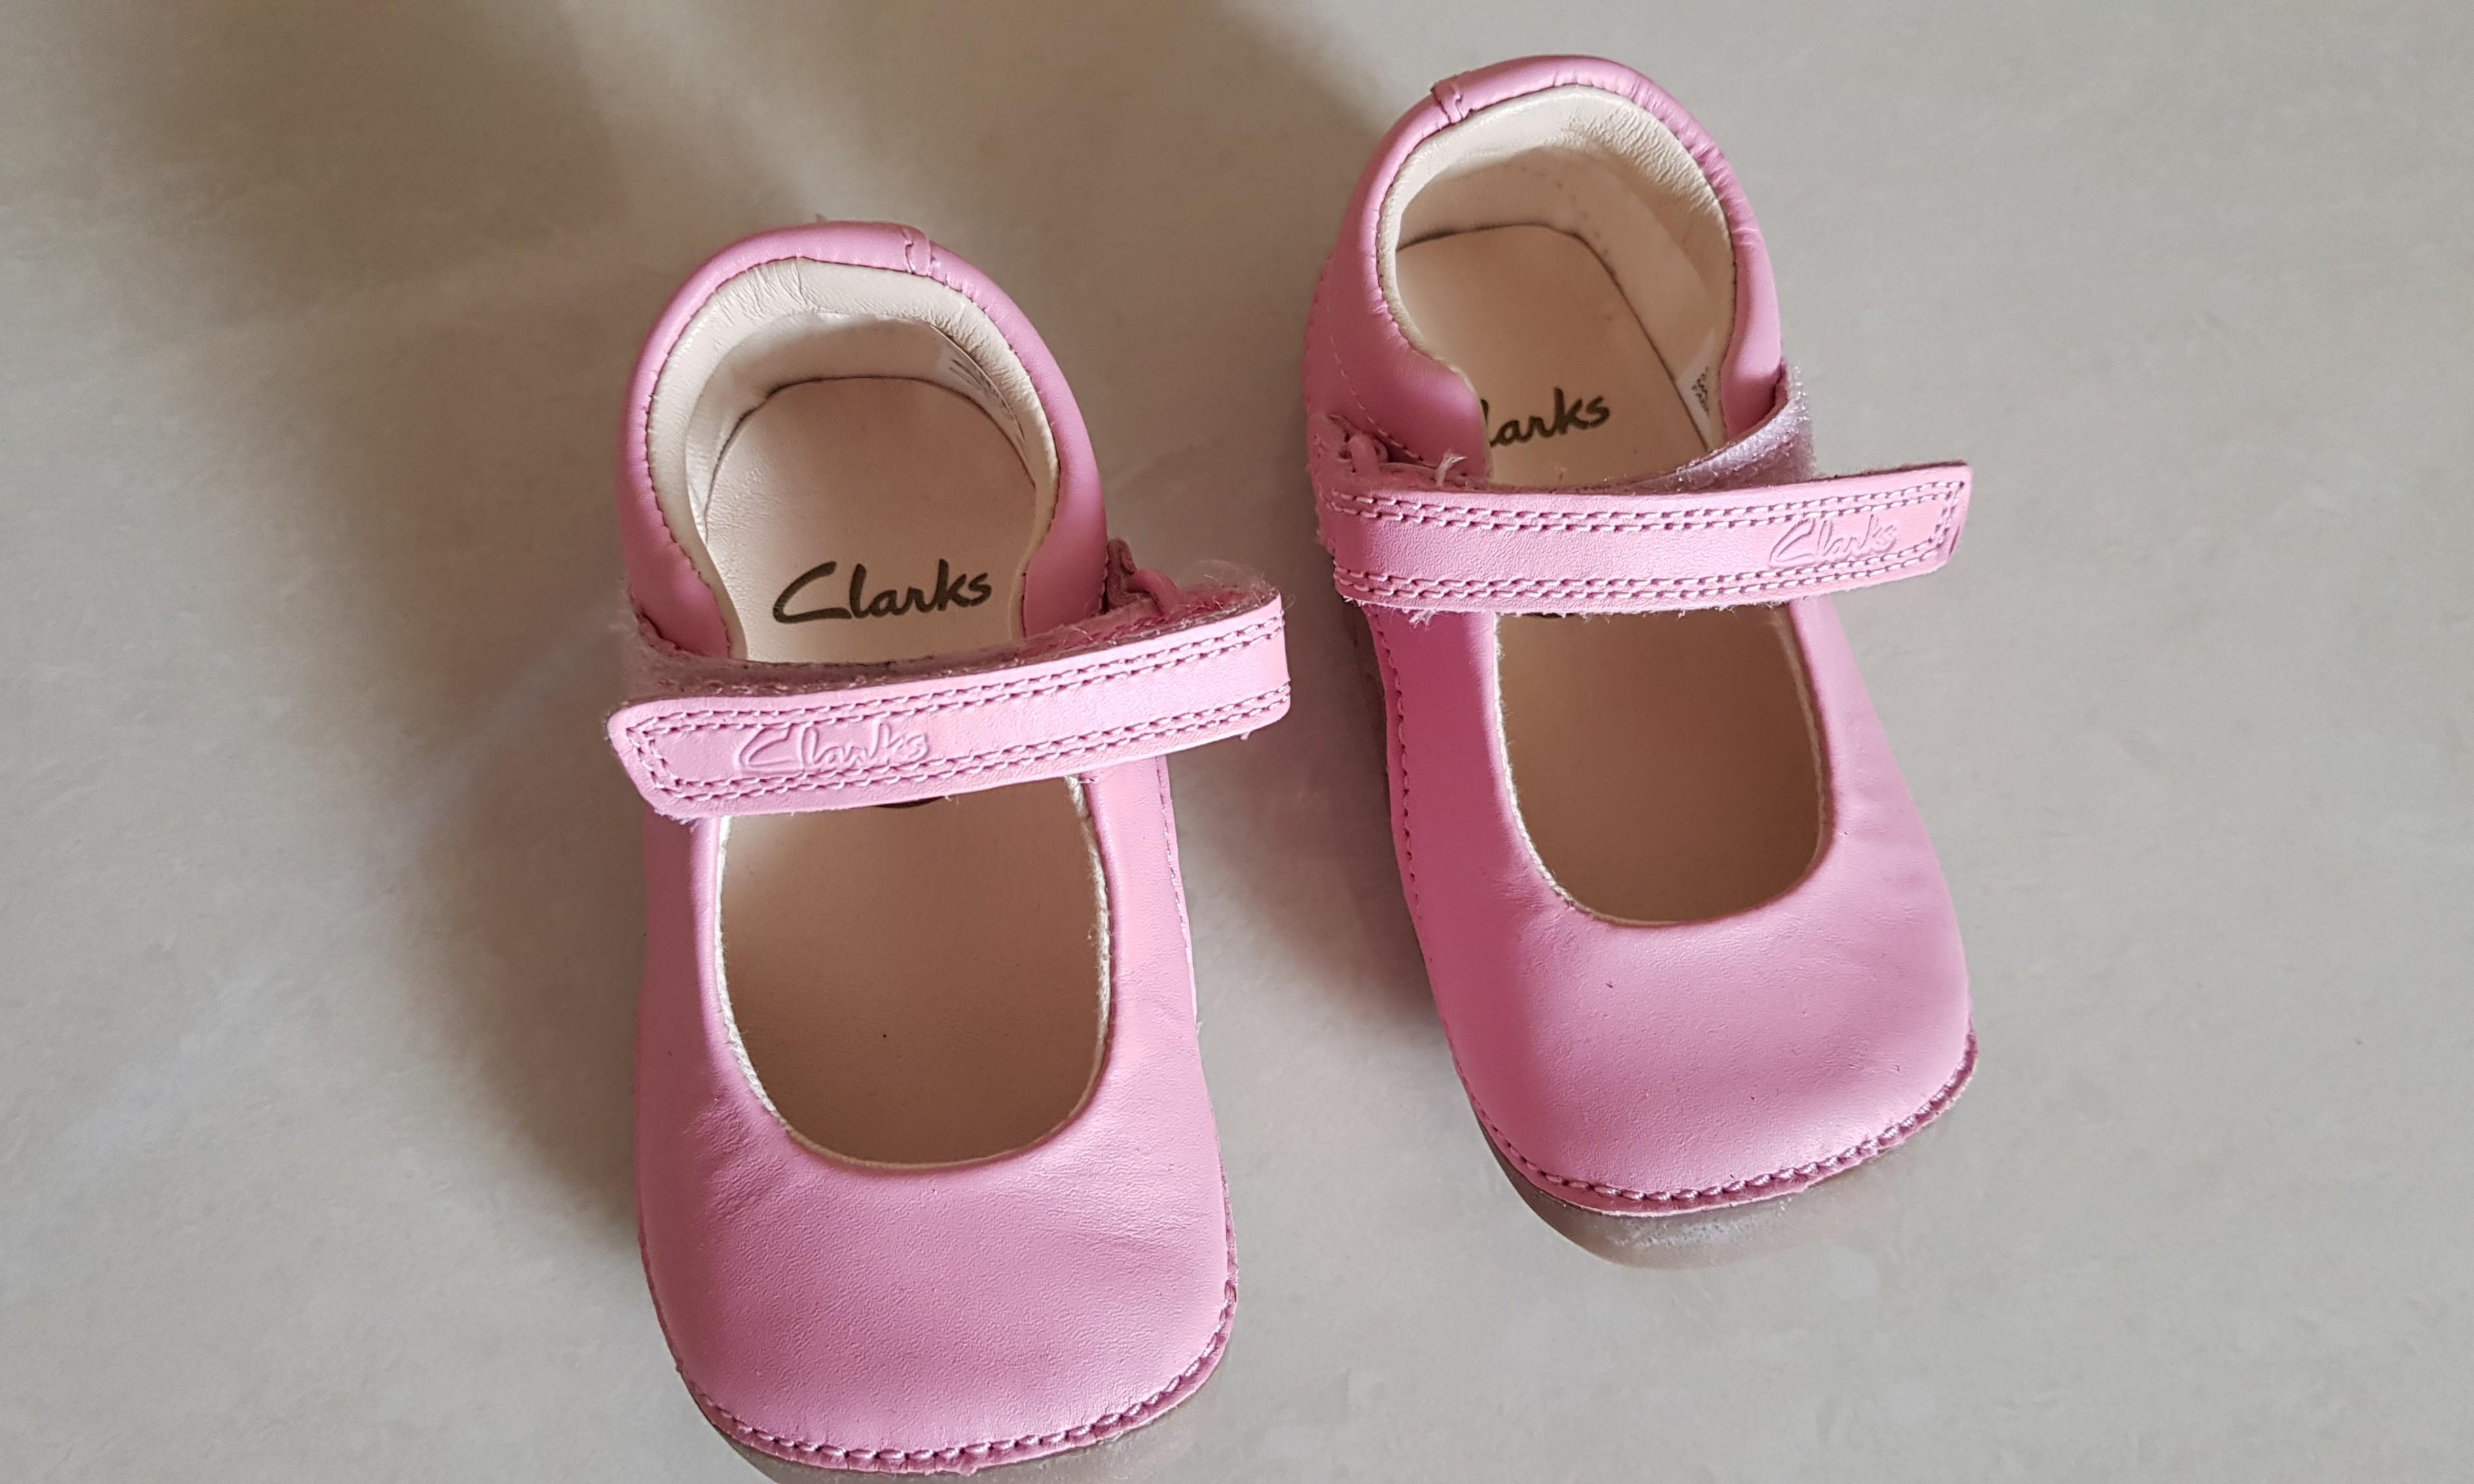 Clarks kids pink shoes for babies 